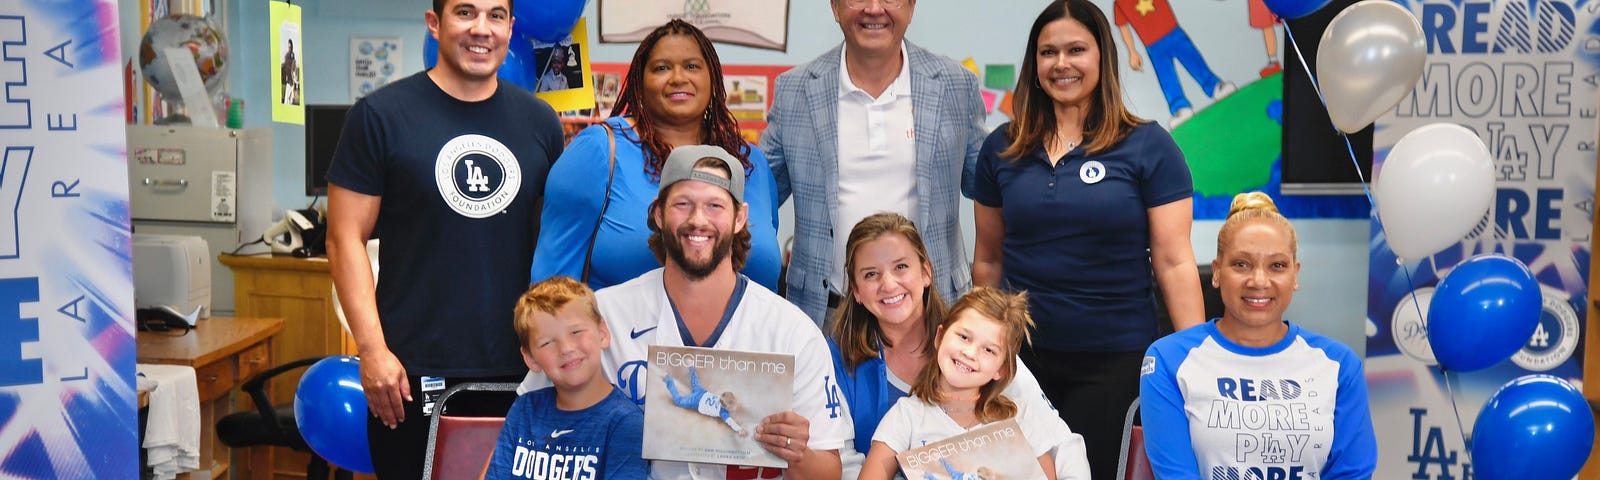 Chris Taylor's mission to support children leads to his first LA  fundraising event, by Cary Osborne